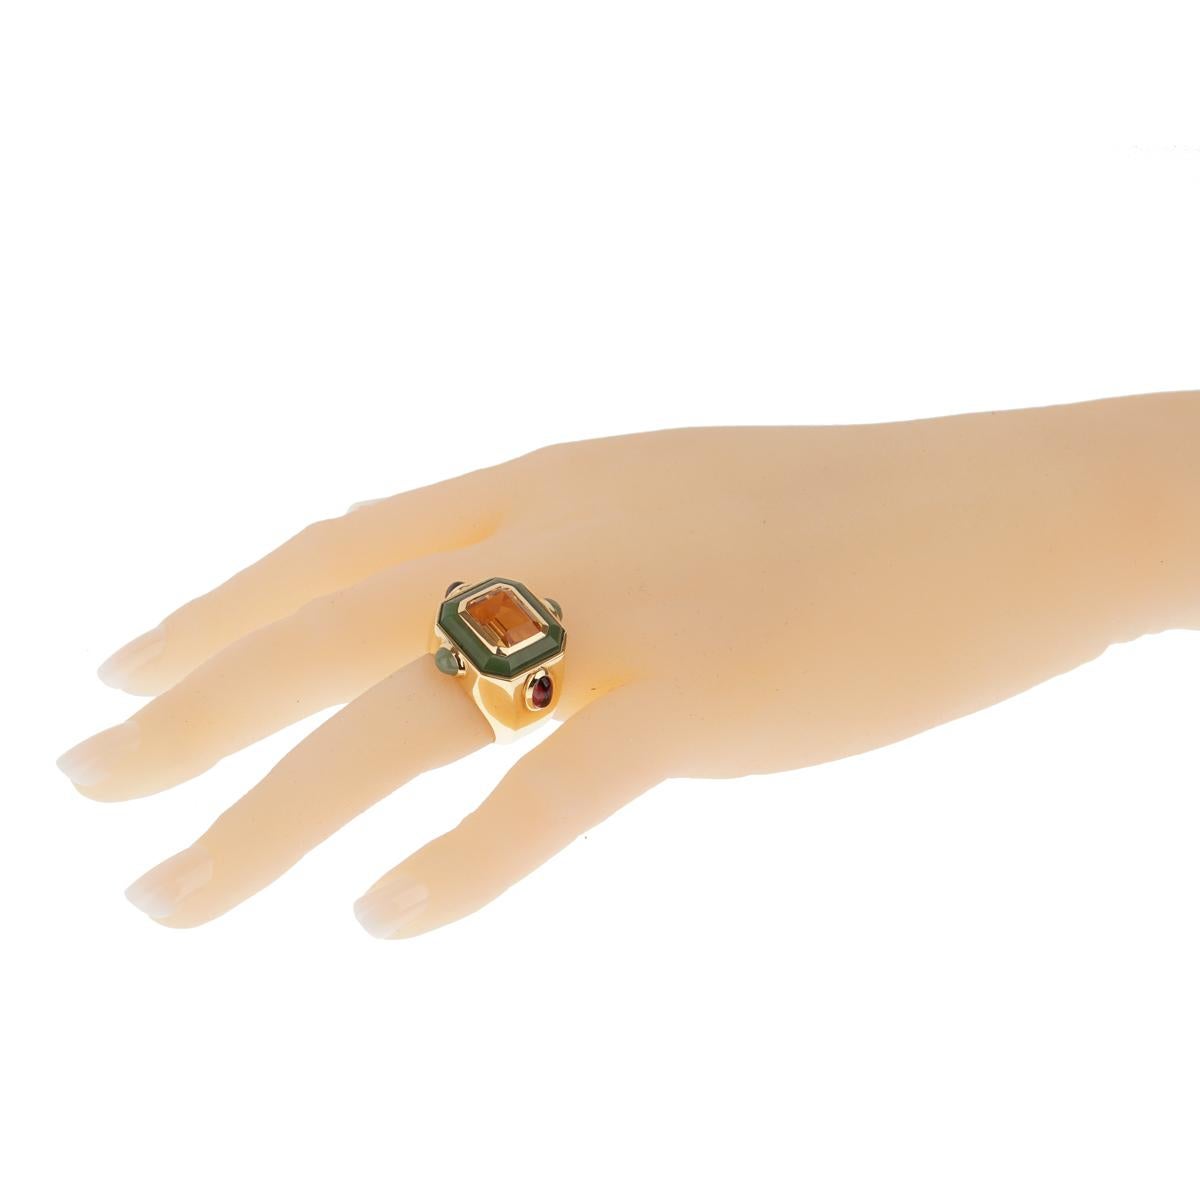 A very chic cocktail ring by Chanel that features a golden emerald cut citrine, and carved jade in 18k yellow gold. 

Size 5 1/2
Width: 1.05